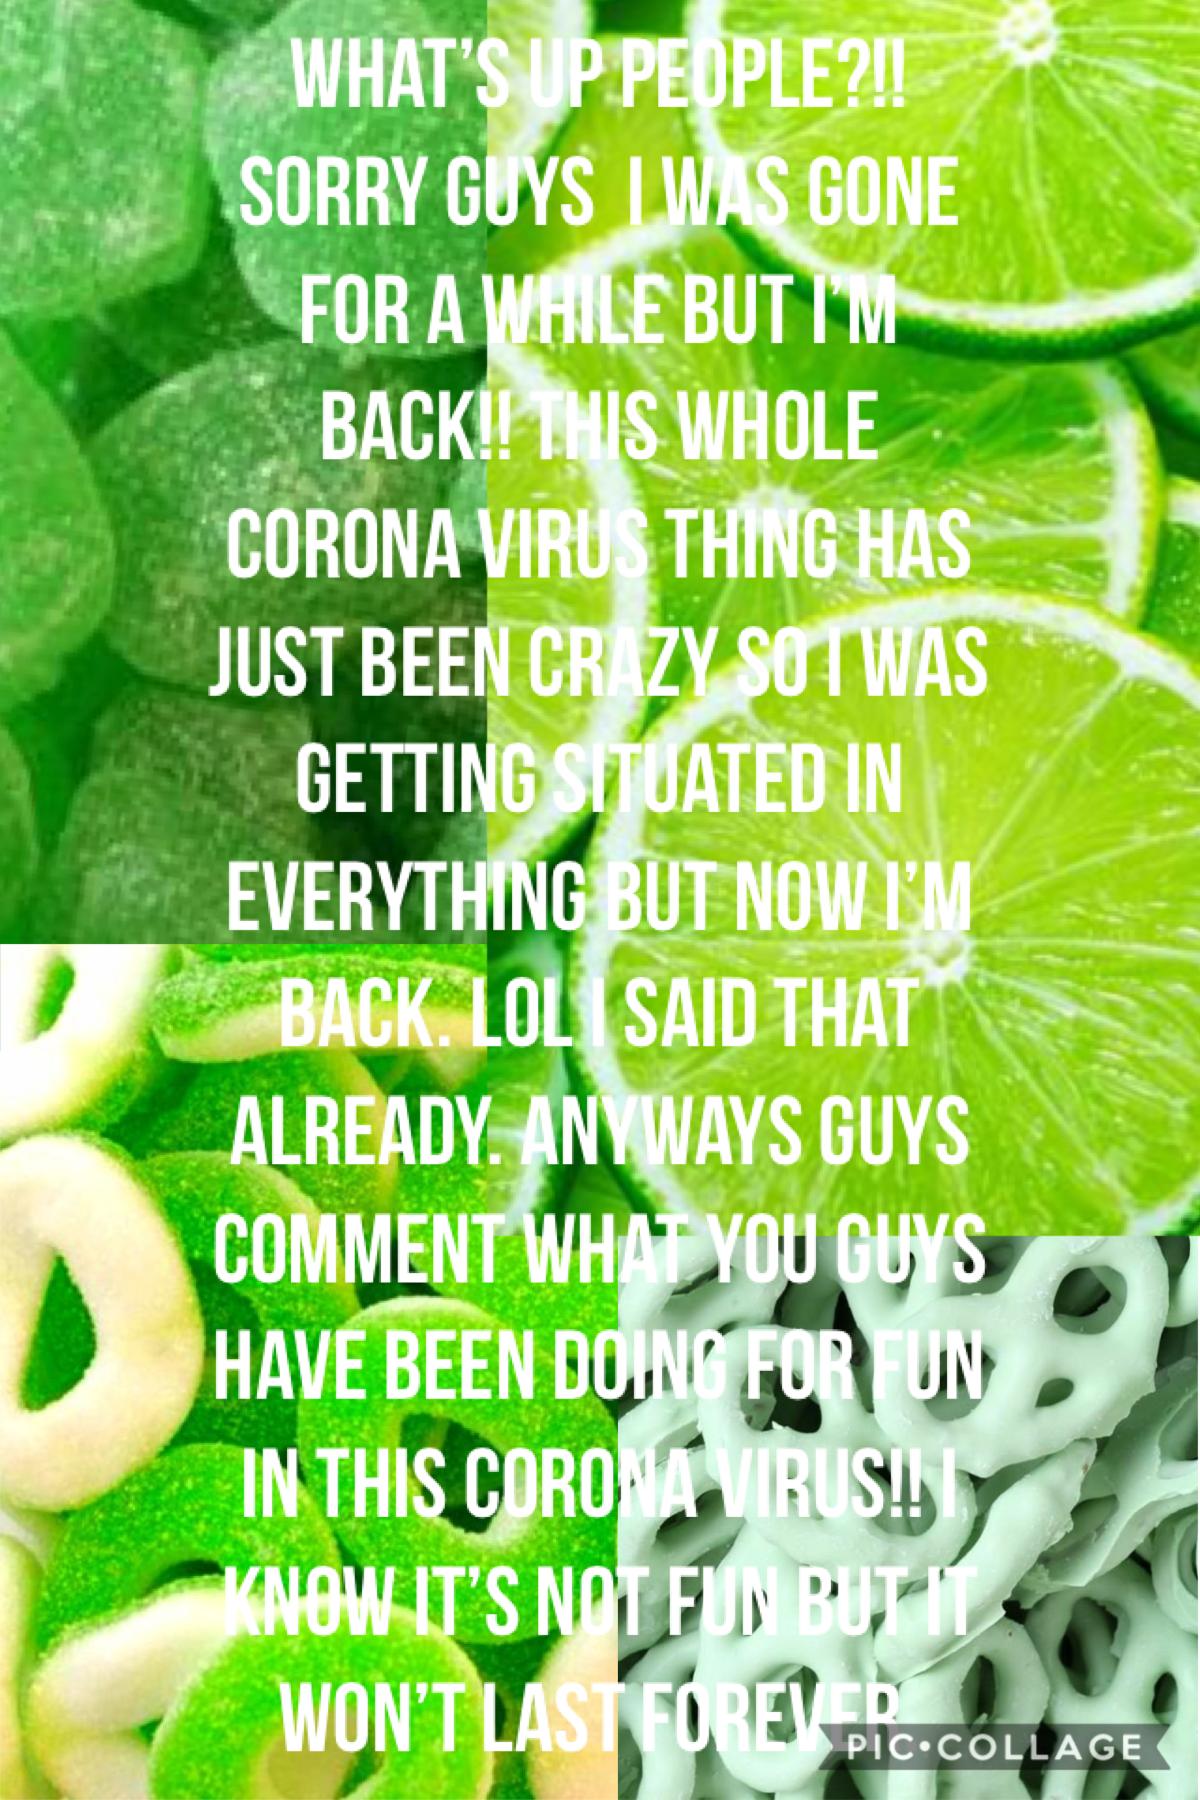 I’m back!! Comment what you guys have been doing for fun during the corona virus?!! I know this is not fun but it won’t last forever!! Wash your hands guys and stay safe!! Love y’all!! 💛💛💛💛💛